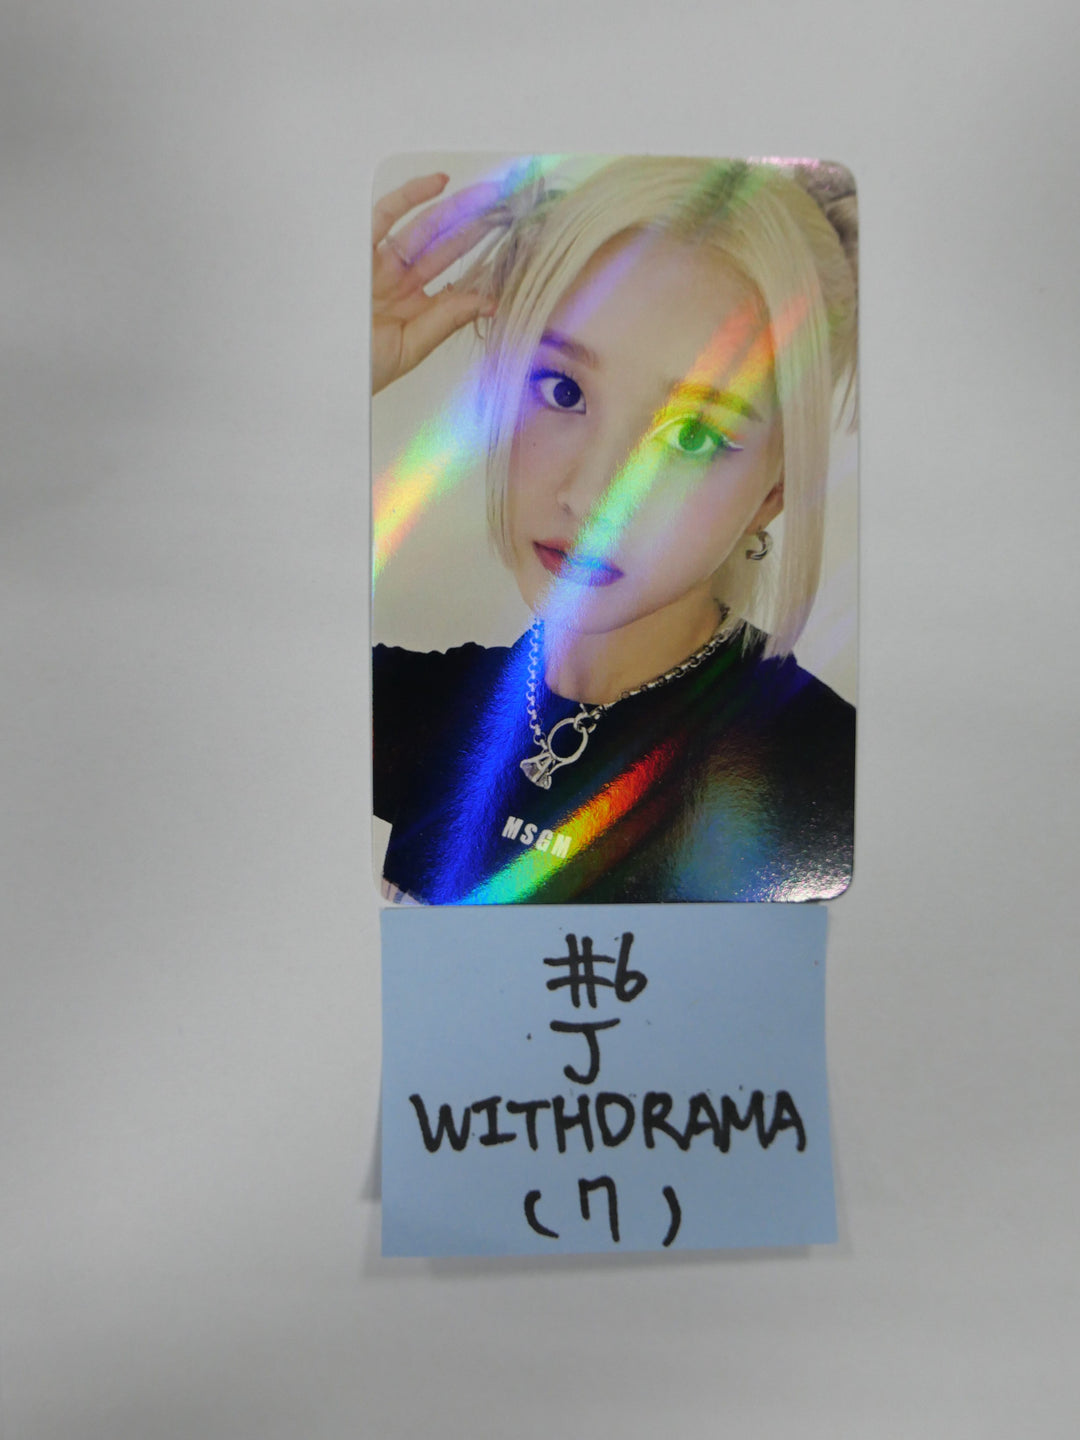 StayC 'STEREOTYPE' - Withdrama Pre-Order Benefit Hologram Photocard Round 2